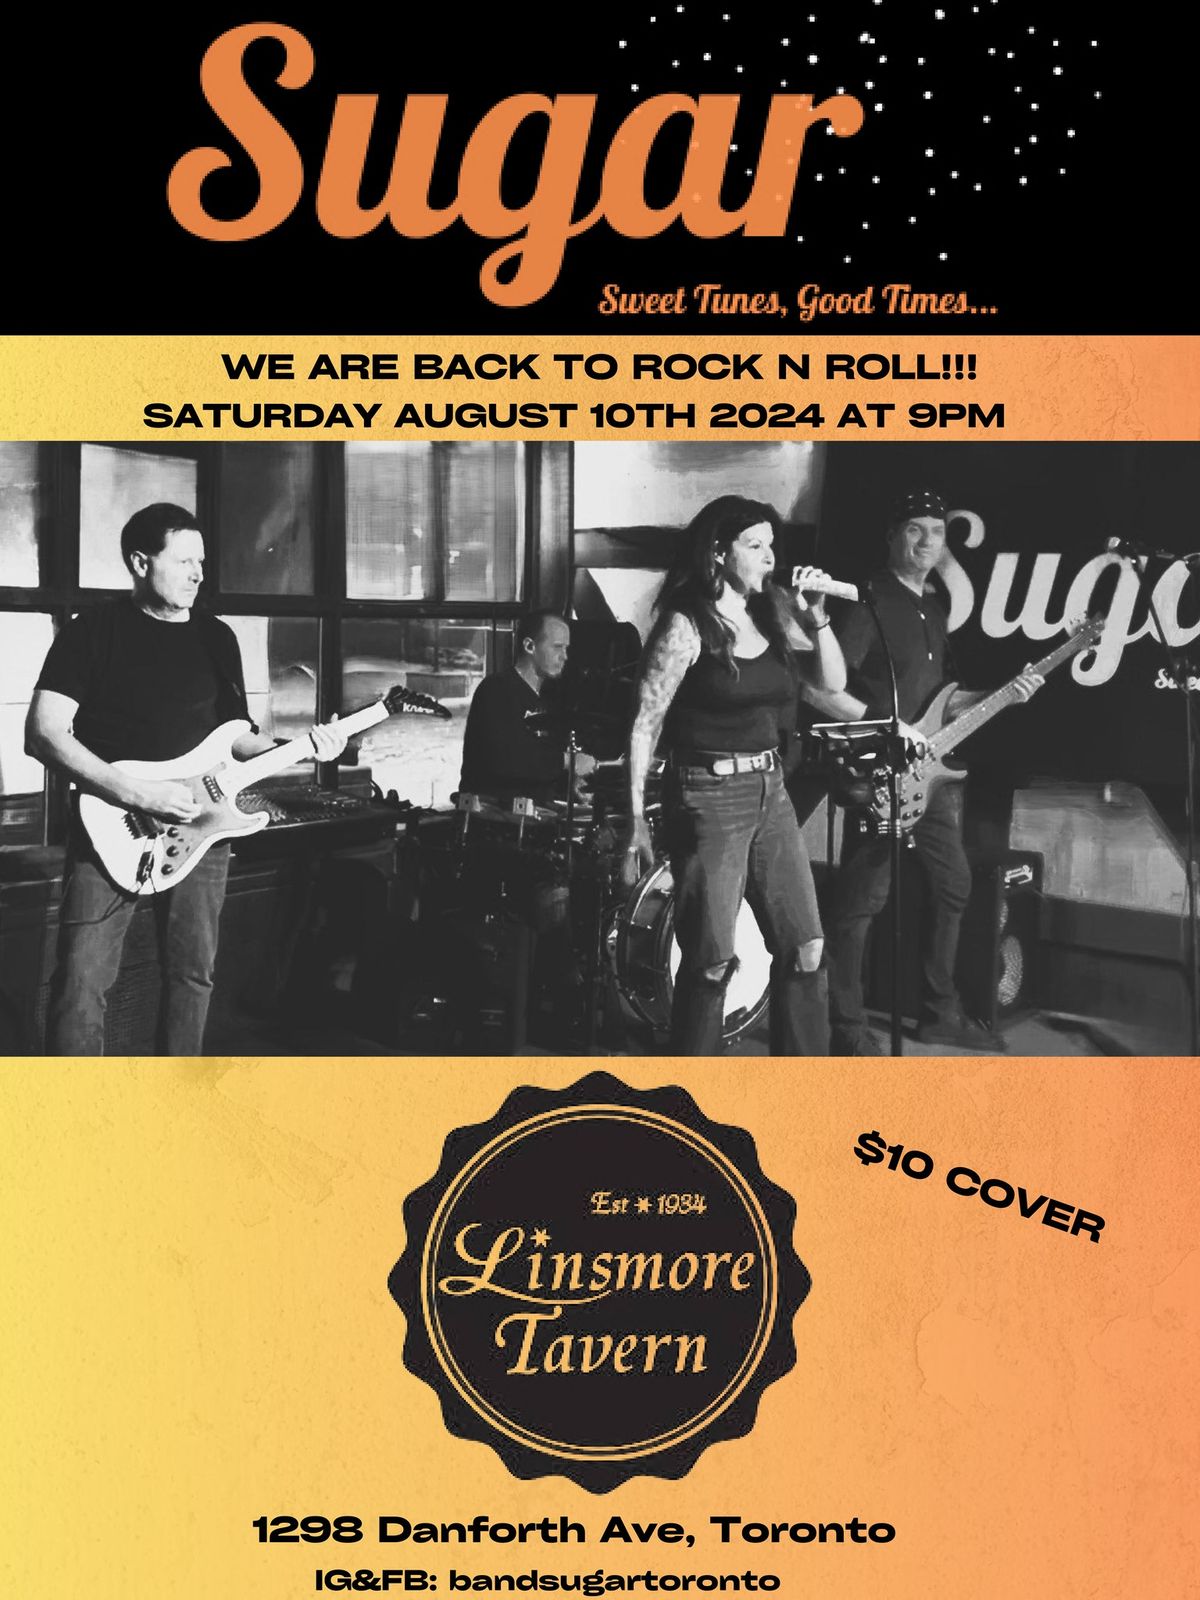 Sugar returns to the Linsmore Tavern for a Saturday night Summer party!